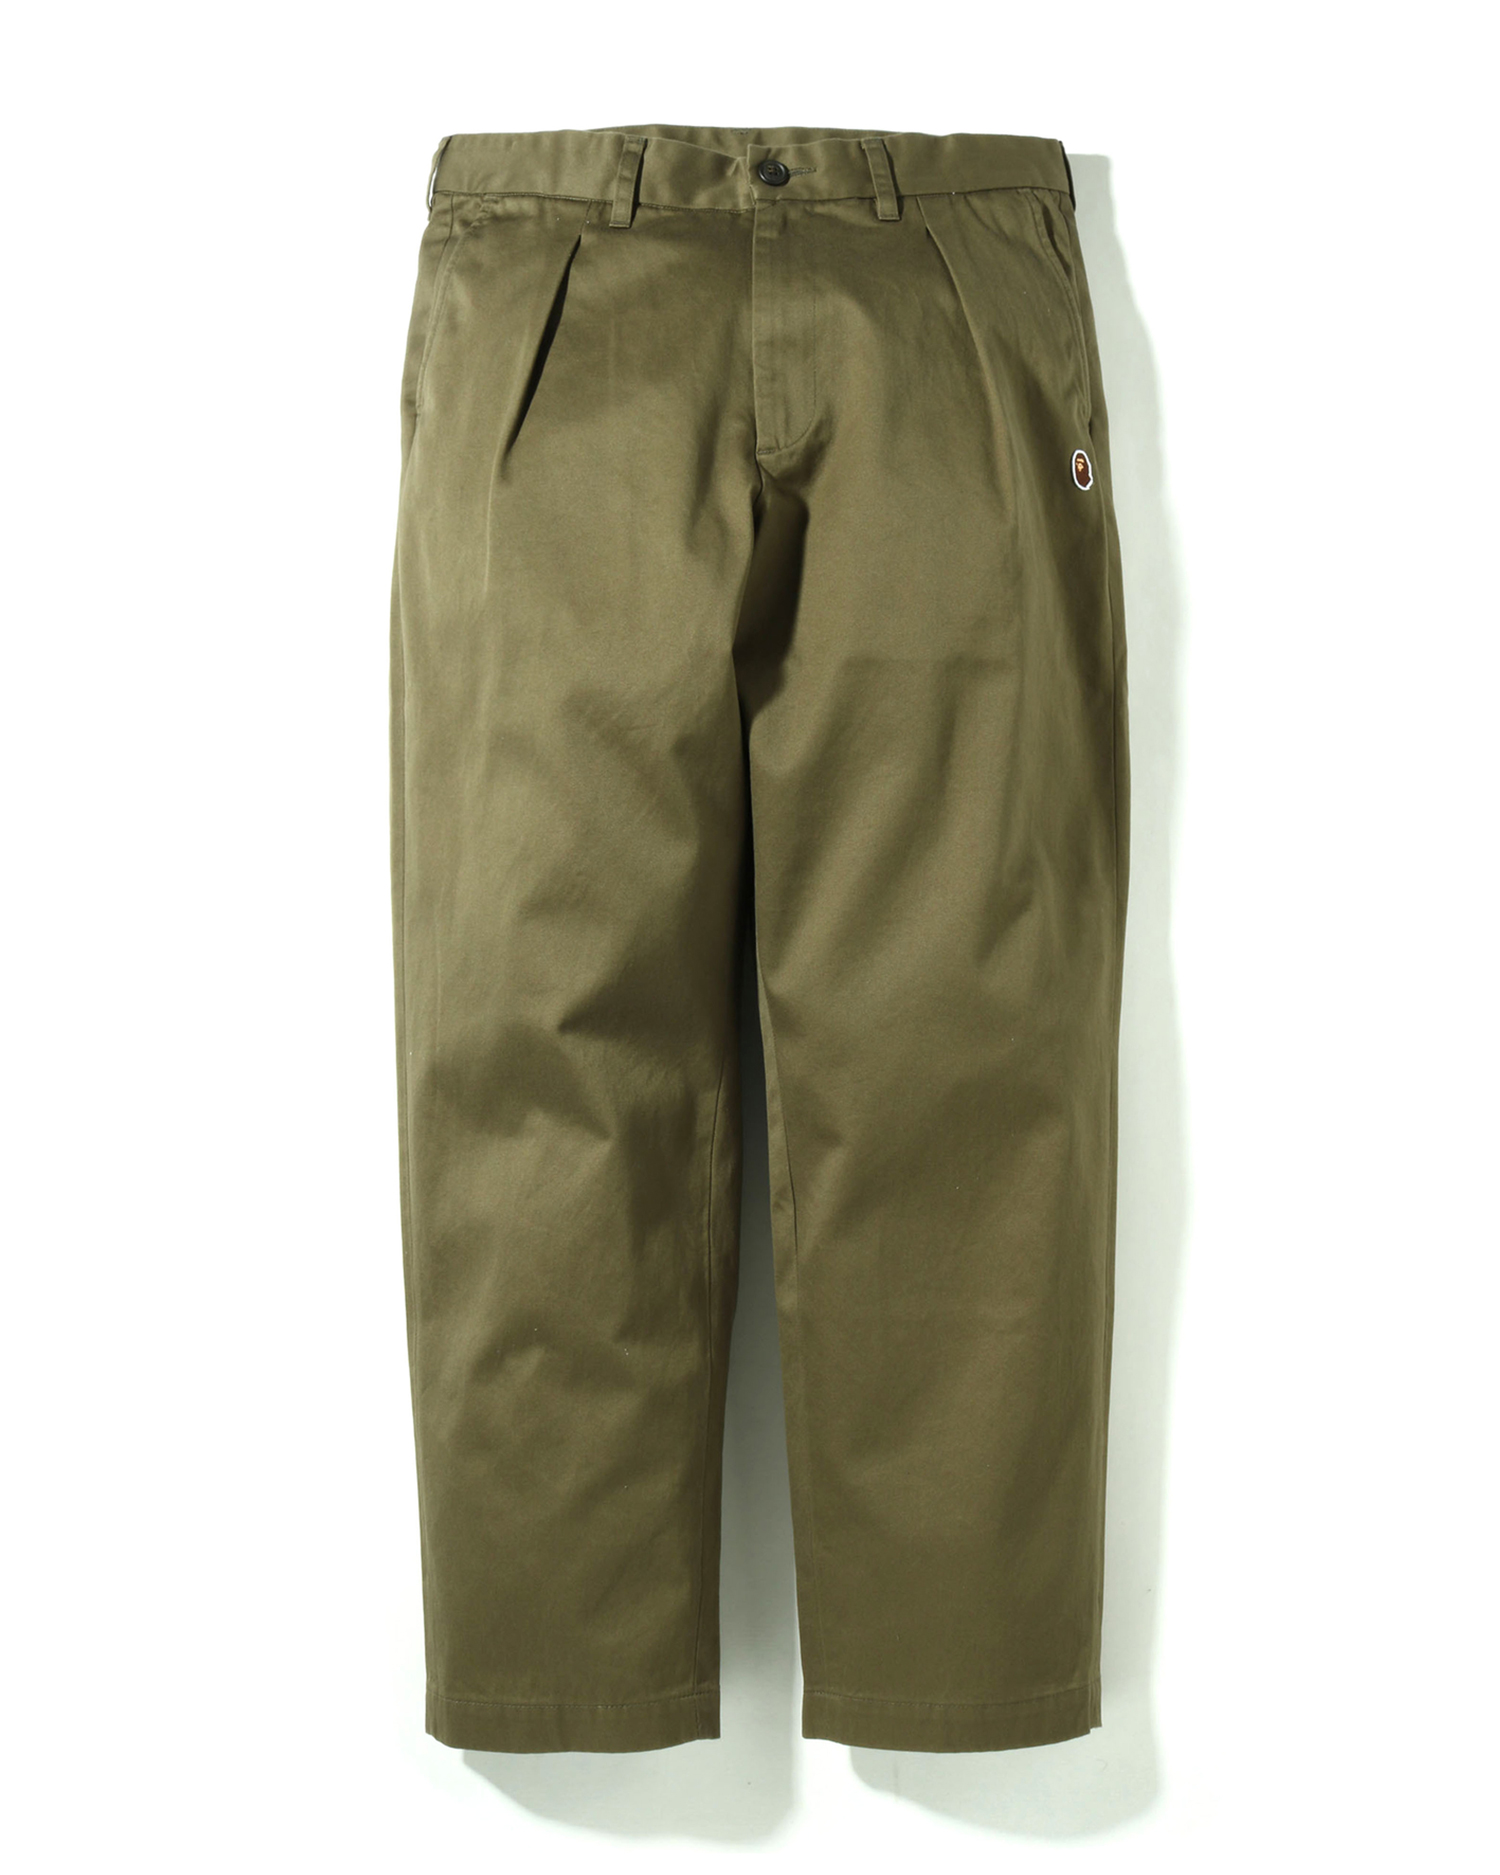 Shop One Point Loose Fit Chino Pants Online | BAPE